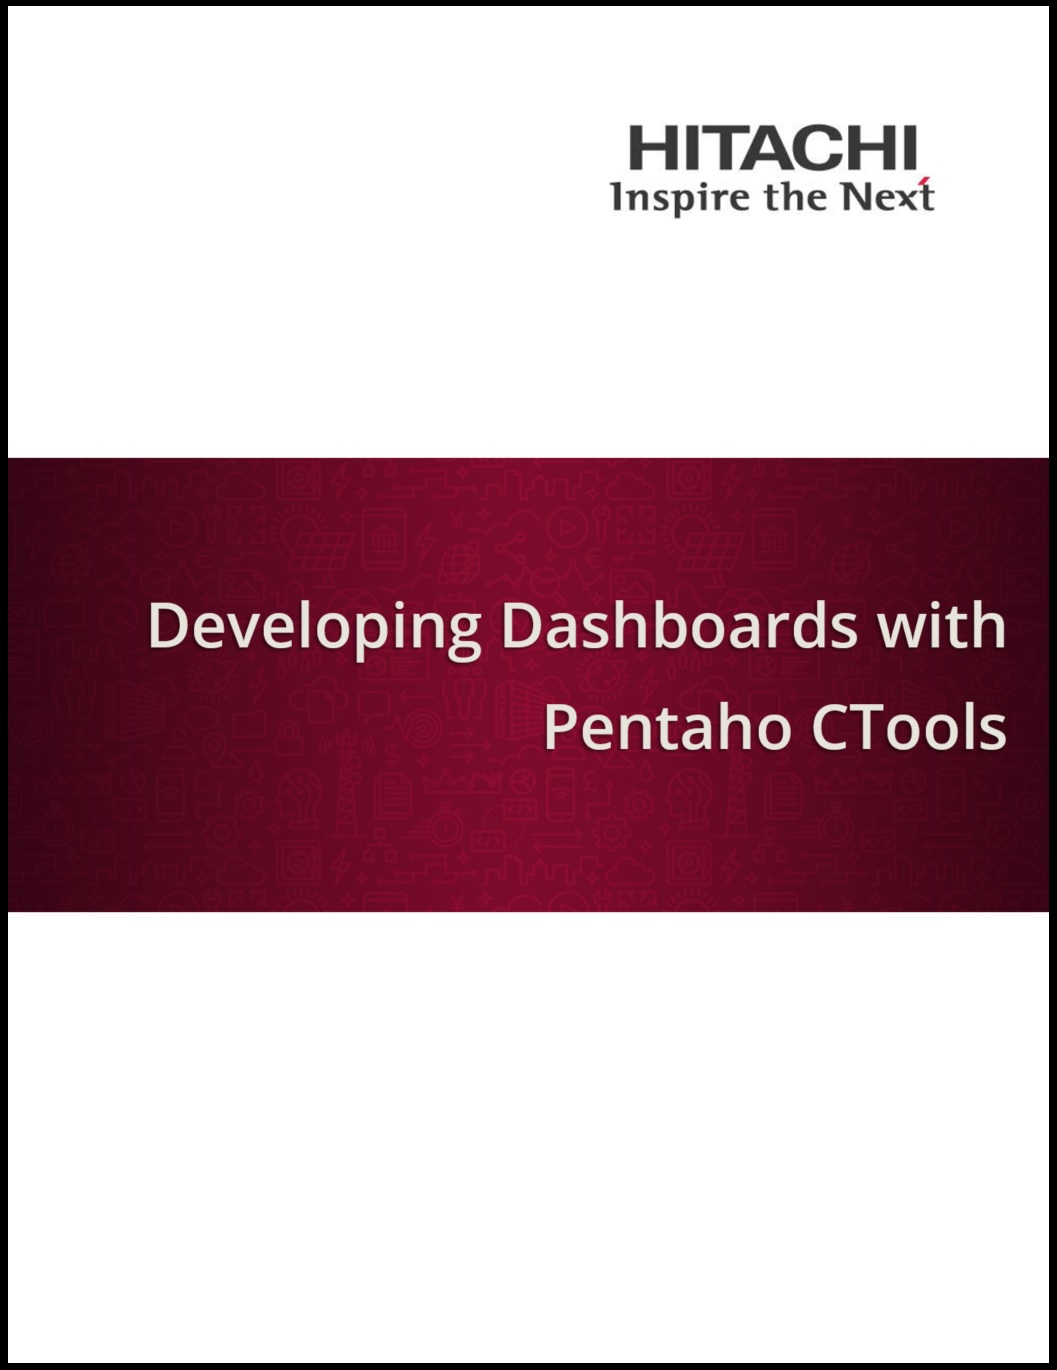 Developing_Dashboards_CTools.jpg